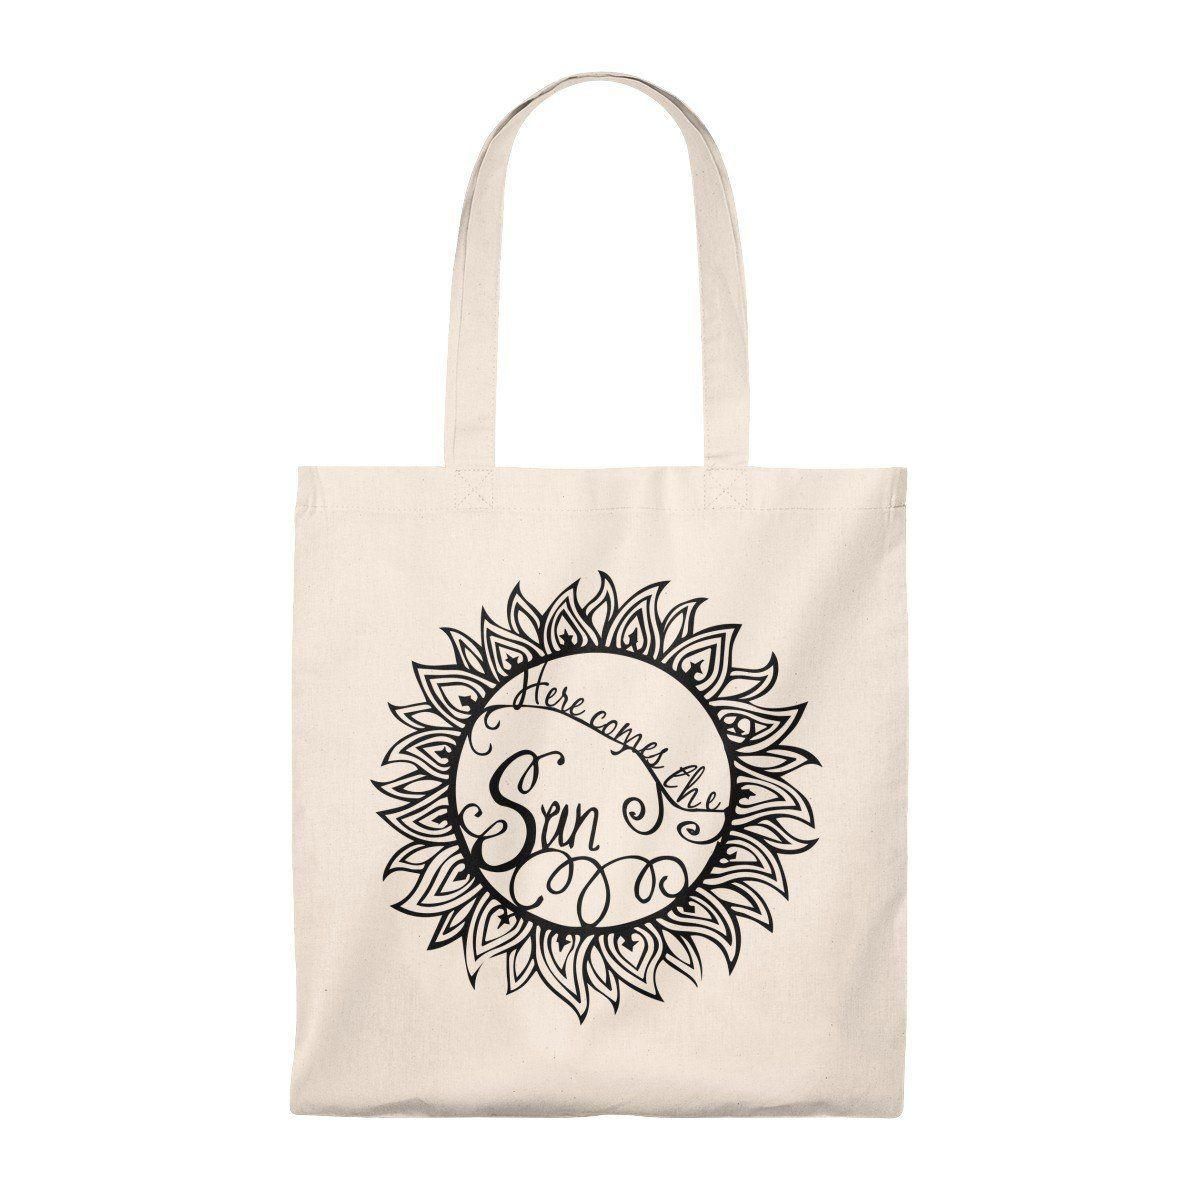 Here Comes The Sun Printed Tote Bag